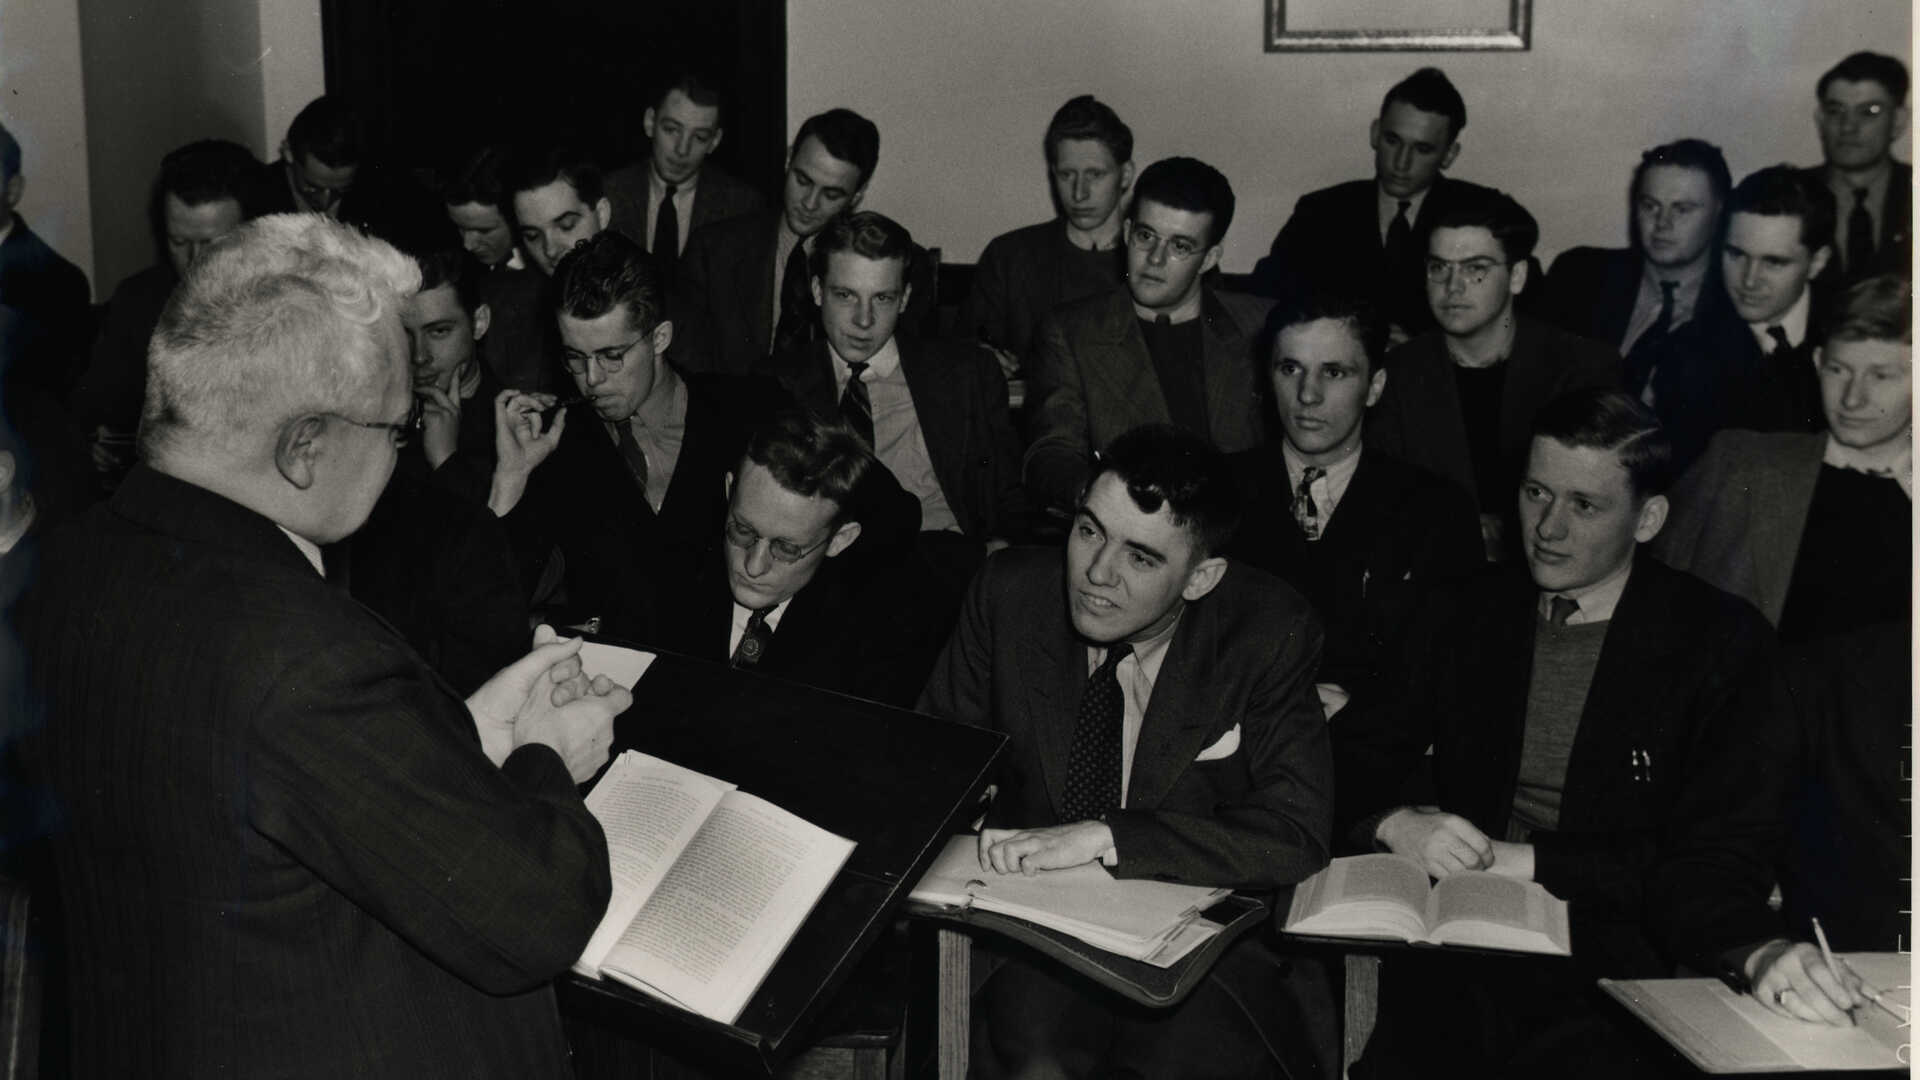 Professor Theodor Brauer stands at the podium instructing an economics class at the College of St. Thomas, 1939.